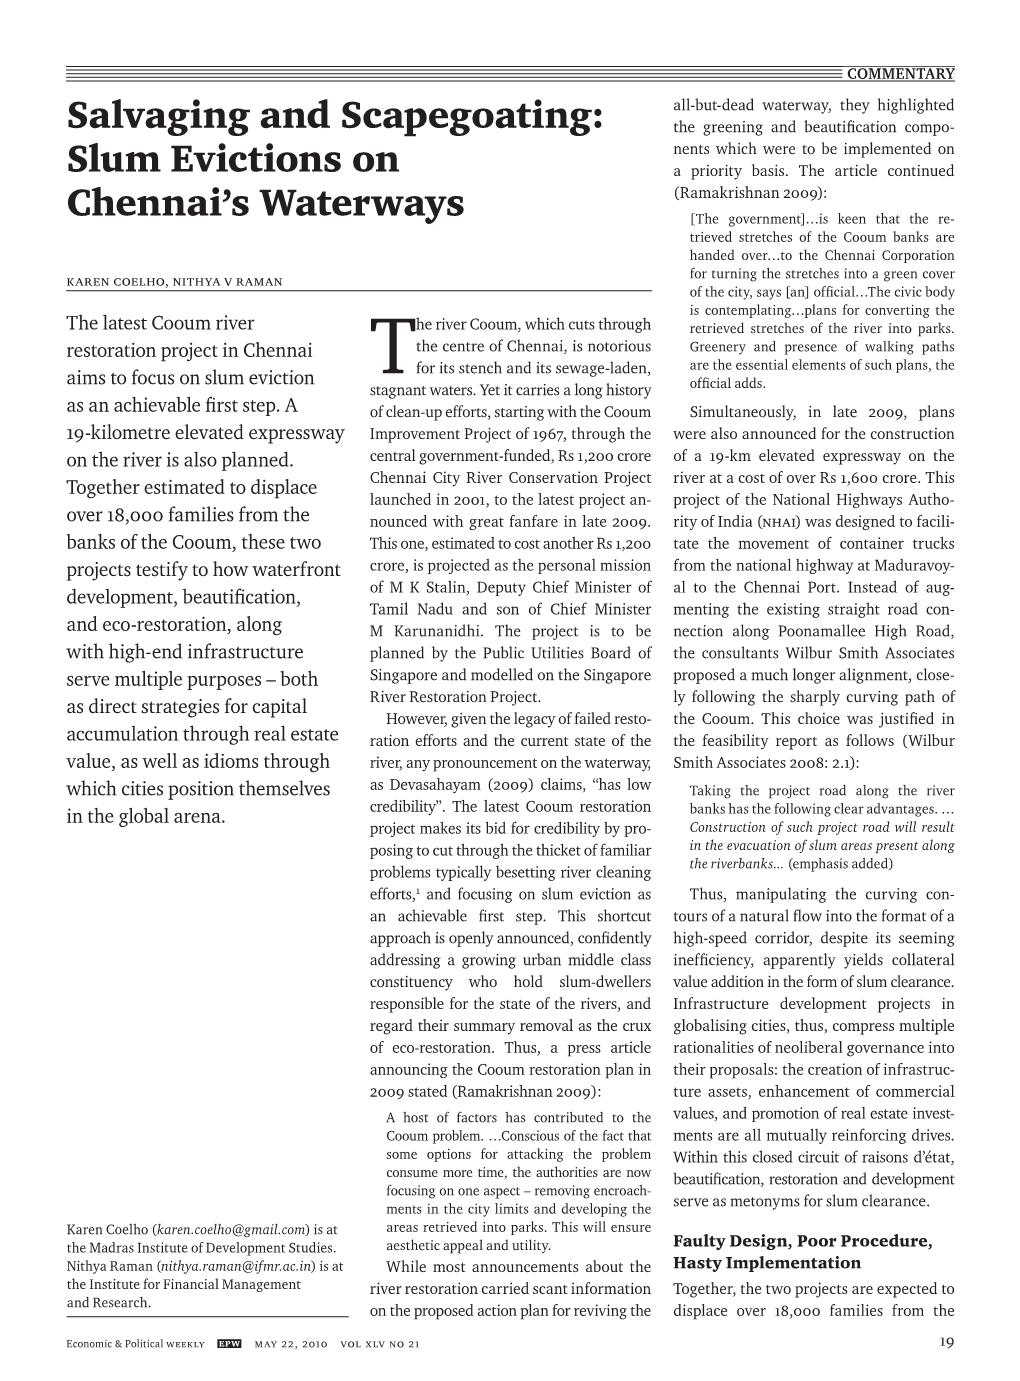 Salvaging and Scapegoating: Slum Evictions on Chennai's Waterways